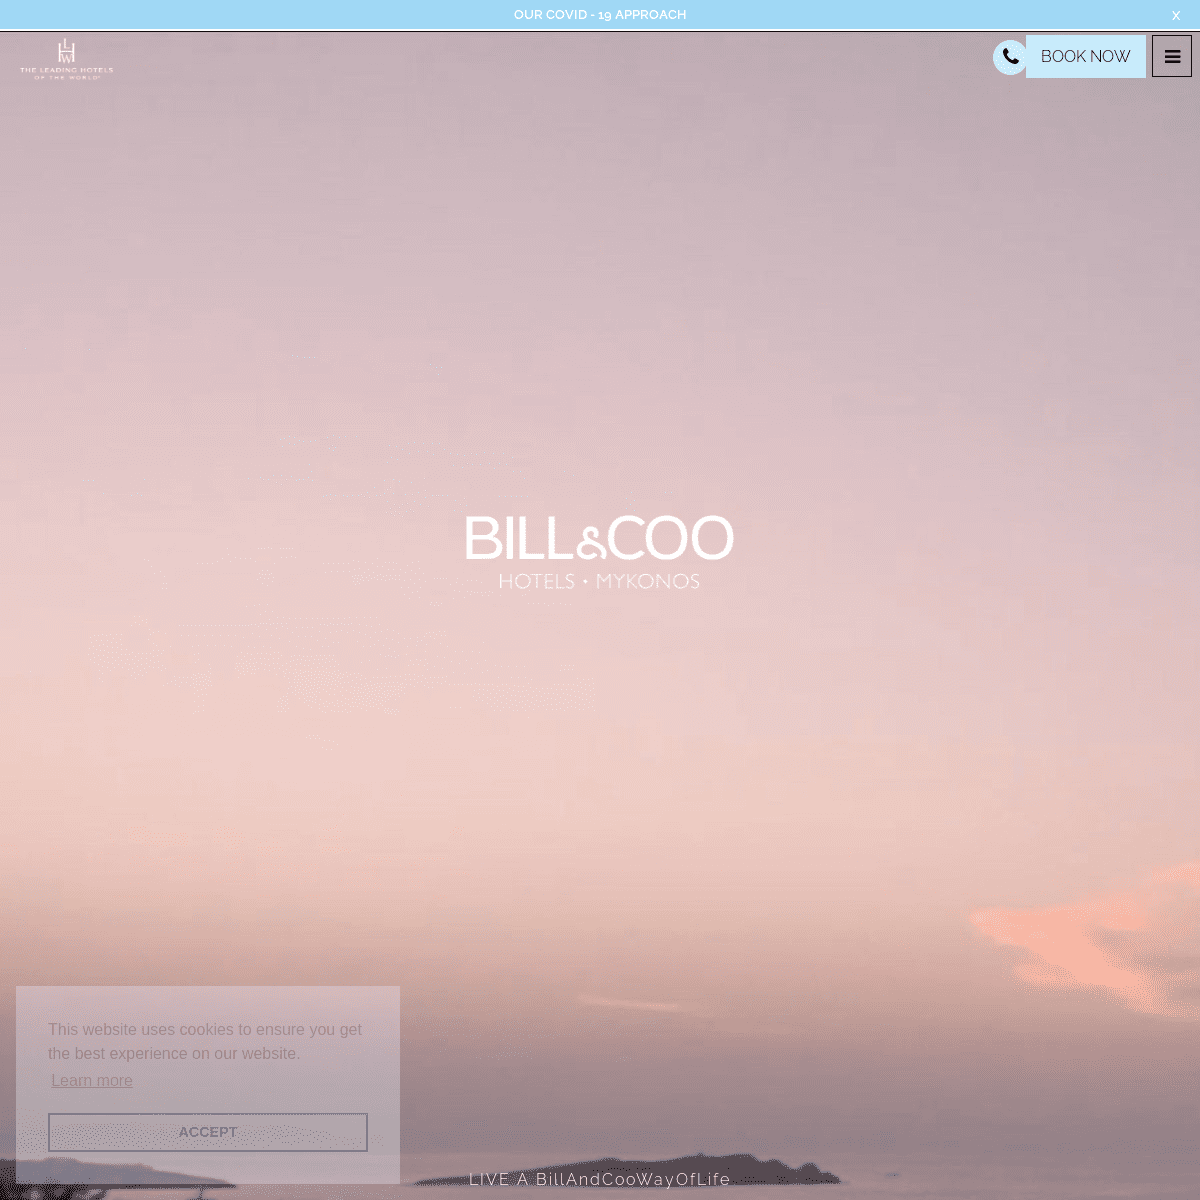 A complete backup of https://bill-coo-hotel.com